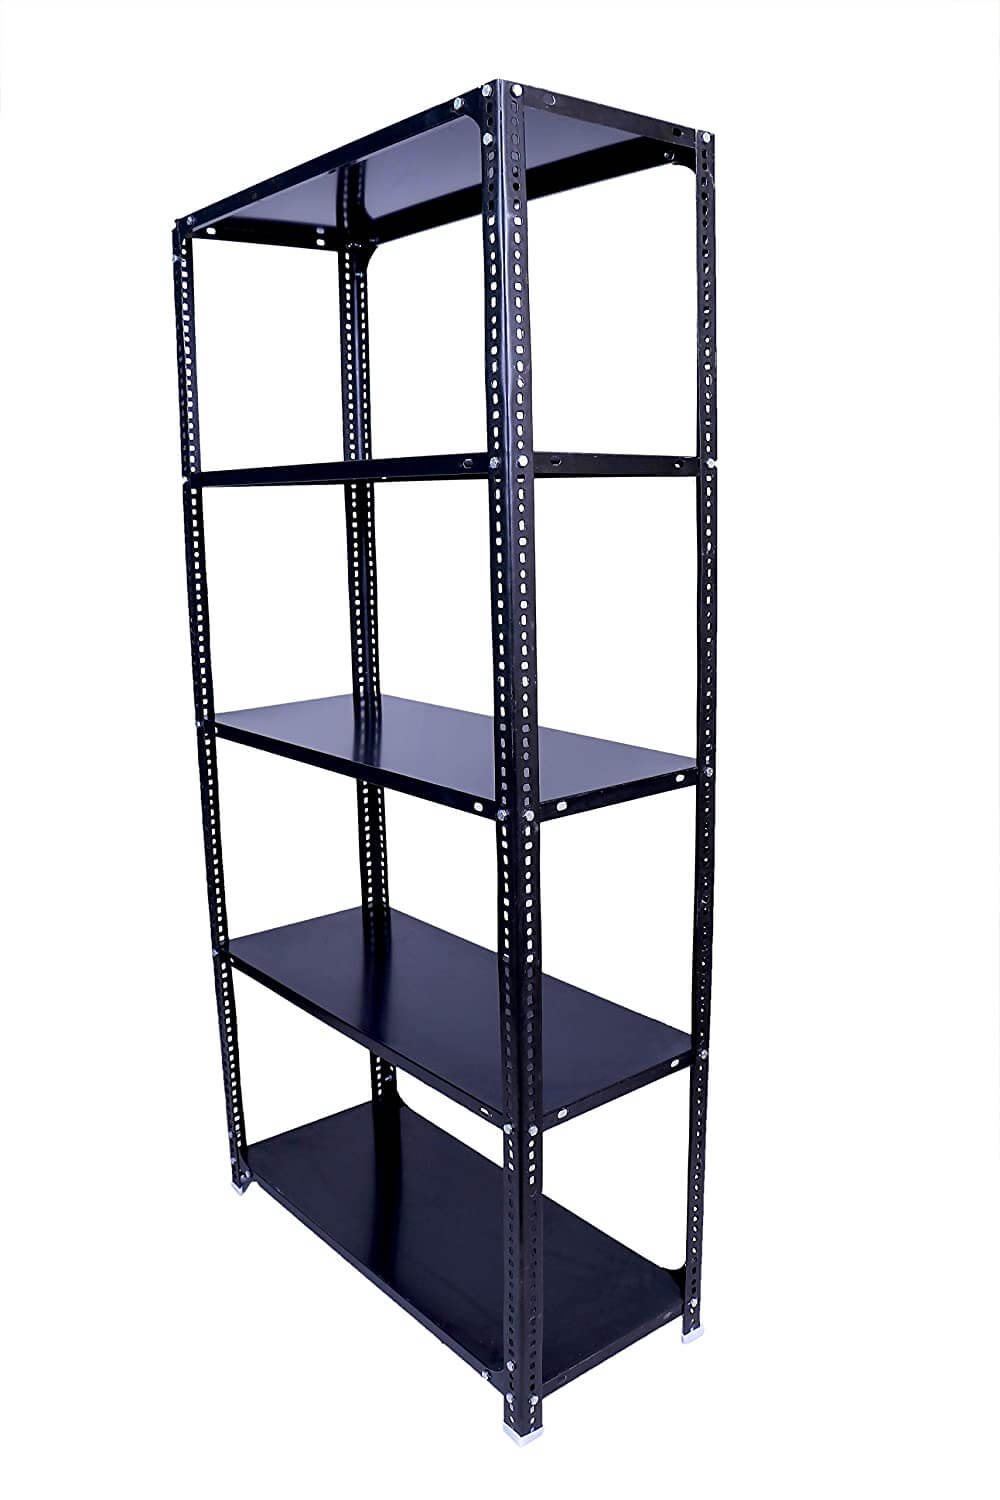 Slotted Angle Rack – True Space Saver For Your Facility